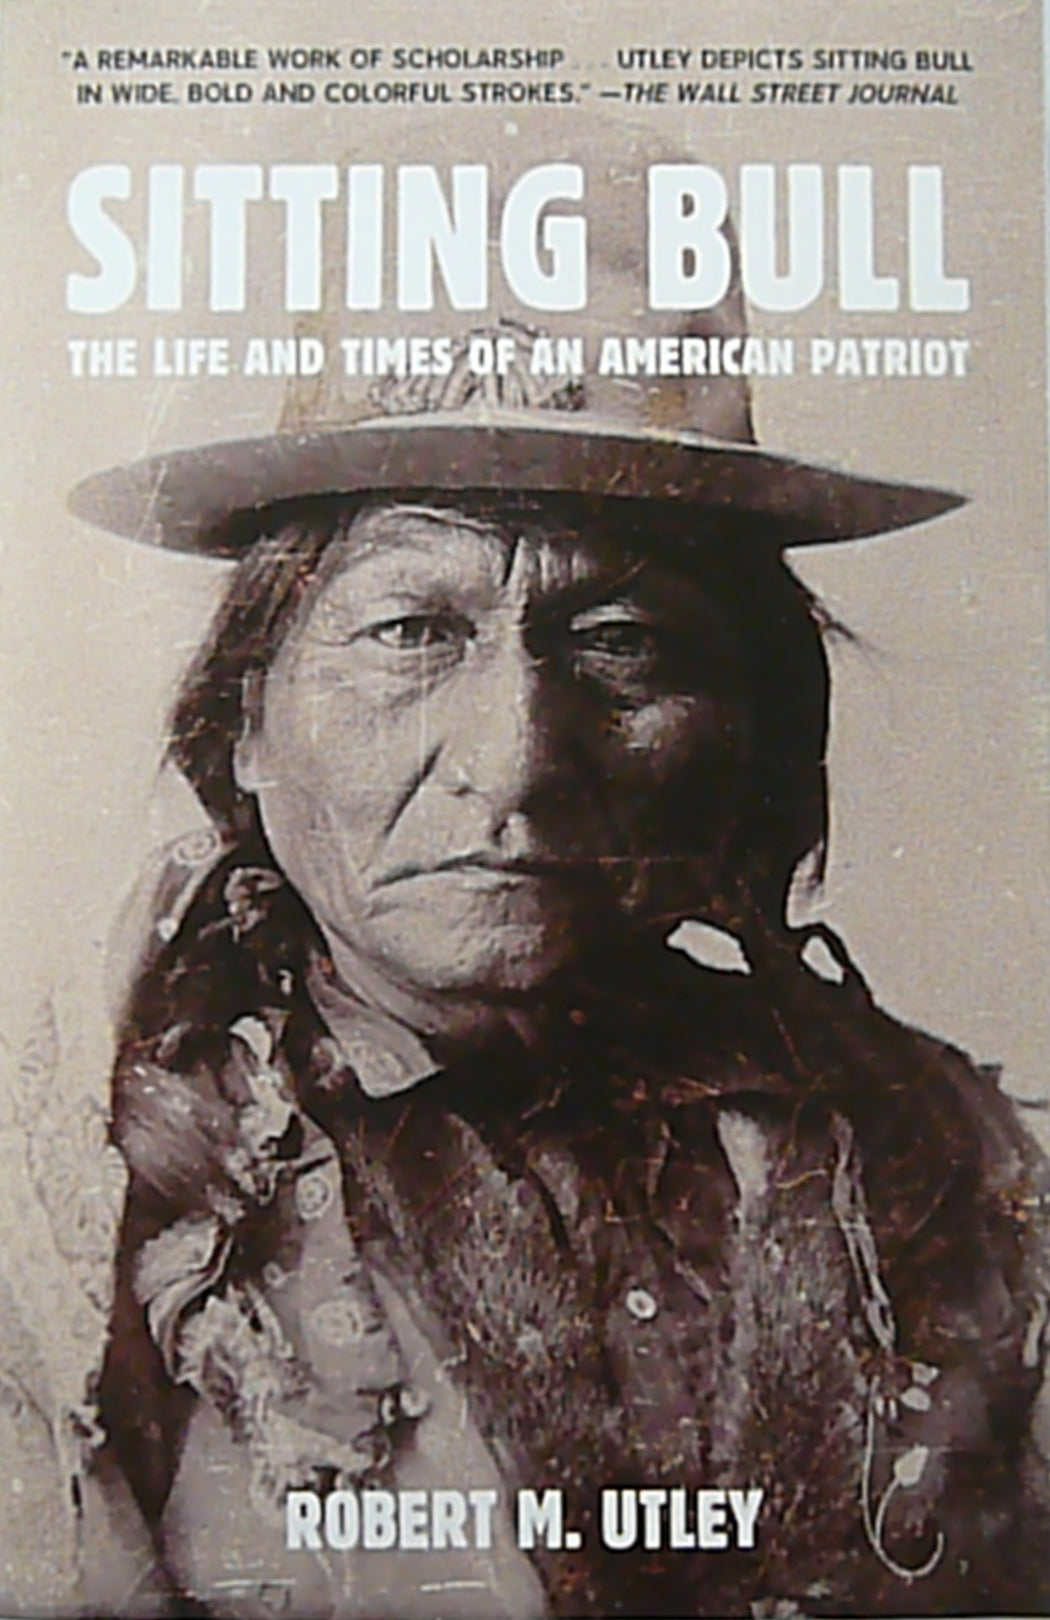 Sitting Bull the life and times of an American patriot